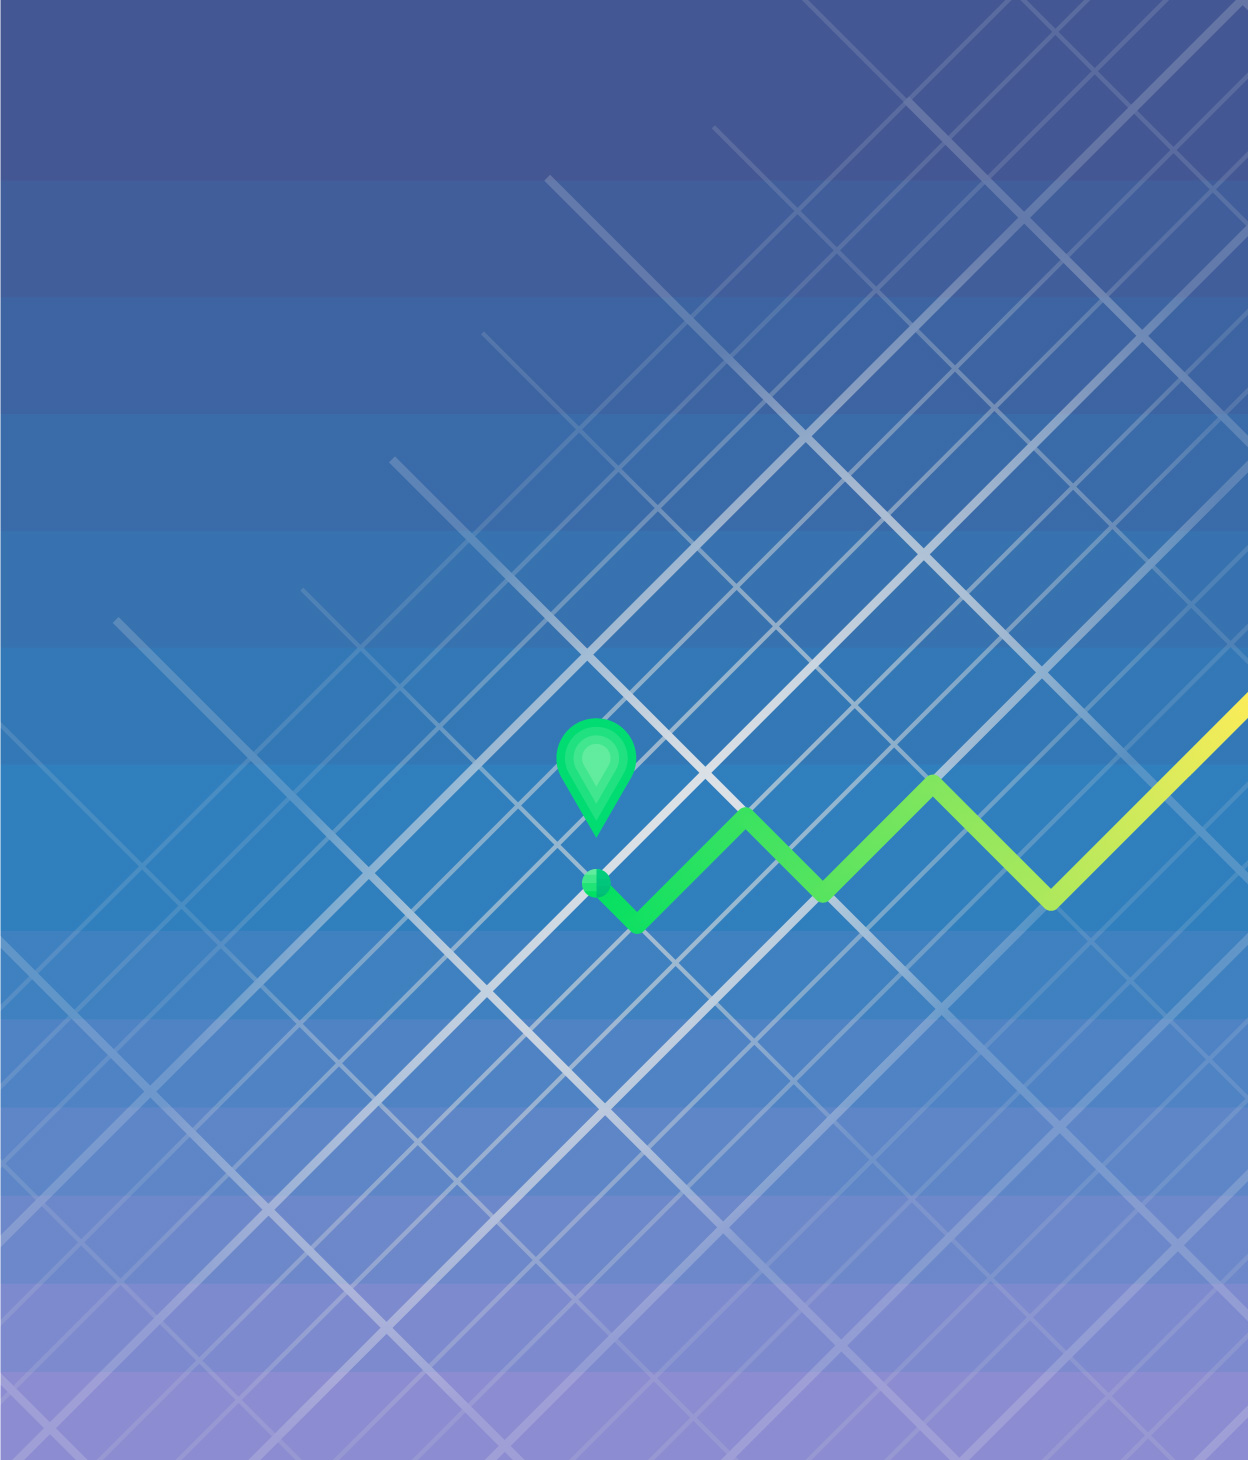 Illustration of a roadmap with a green highlighted route overlaid onto a street grid with a blue and purple gradient background